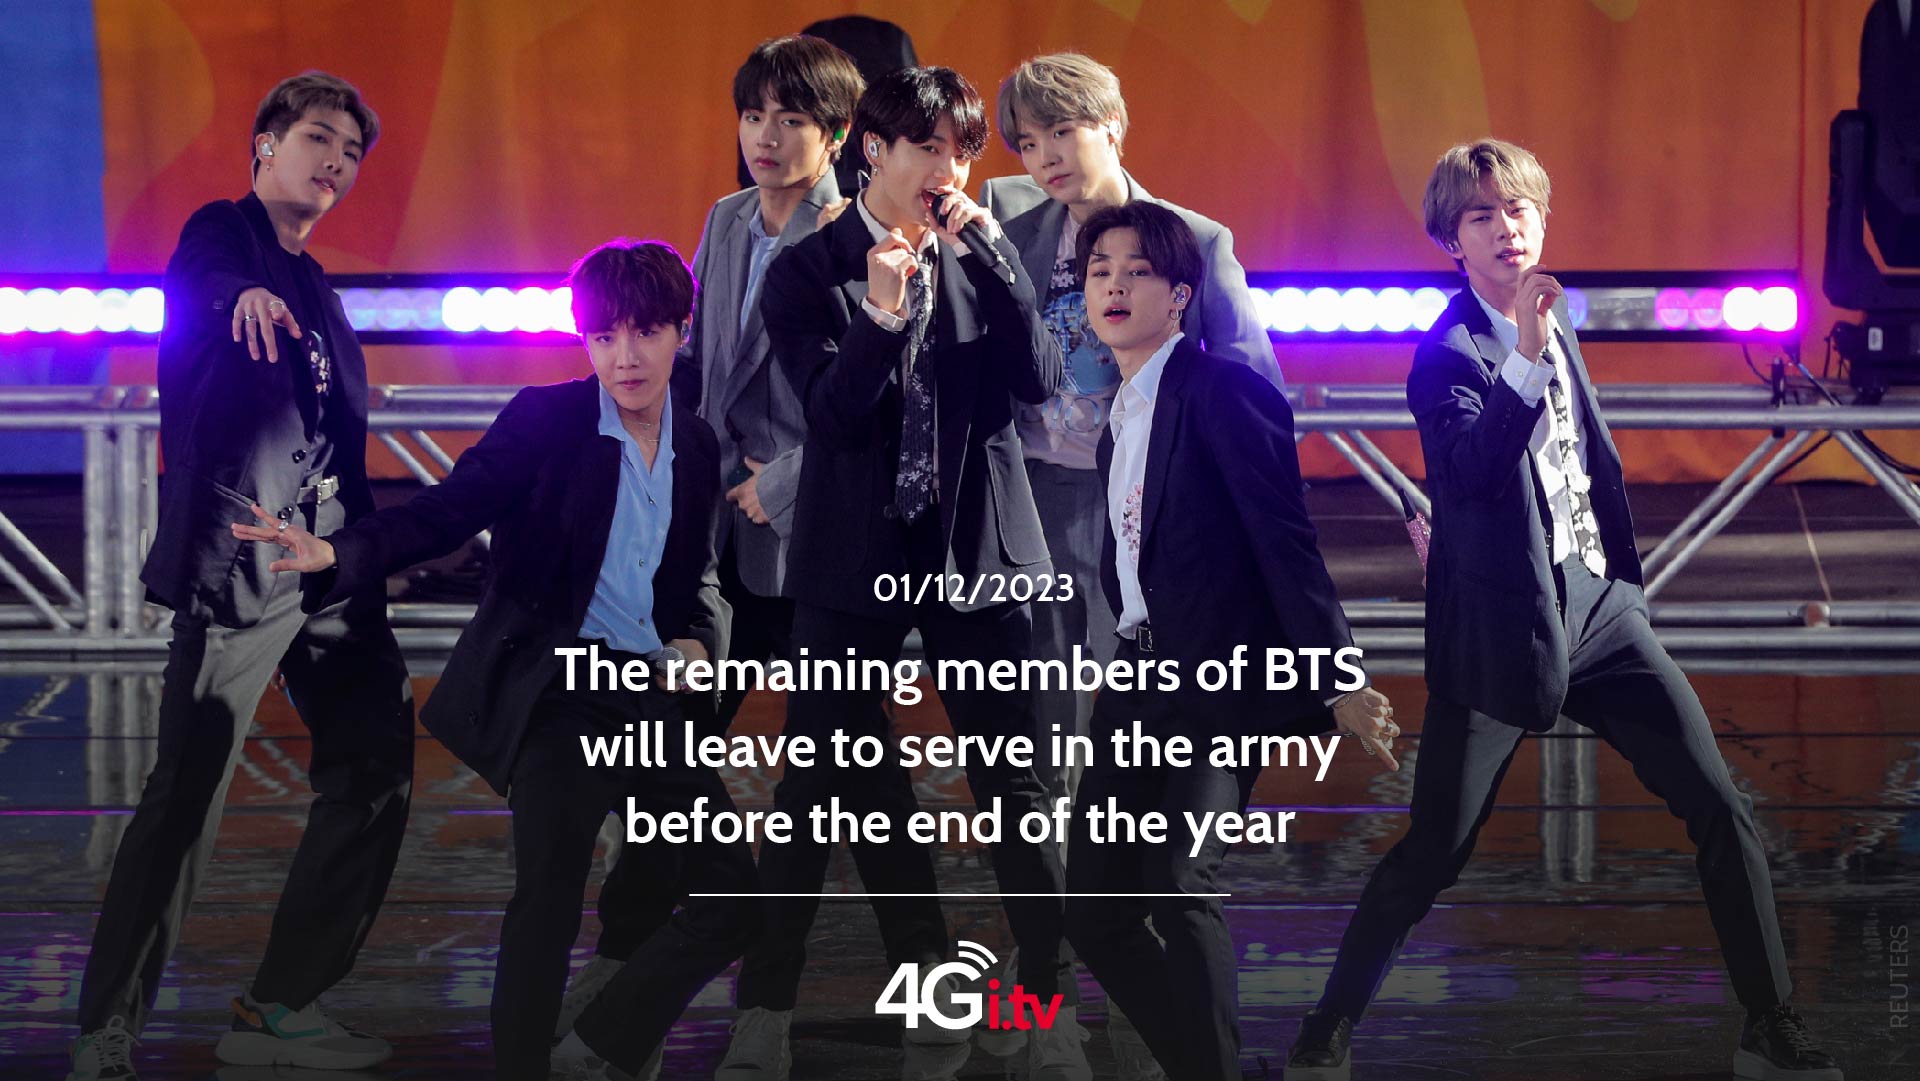 Lesen Sie mehr über den Artikel The remaining members of BTS will leave to serve in the army before the end of the year